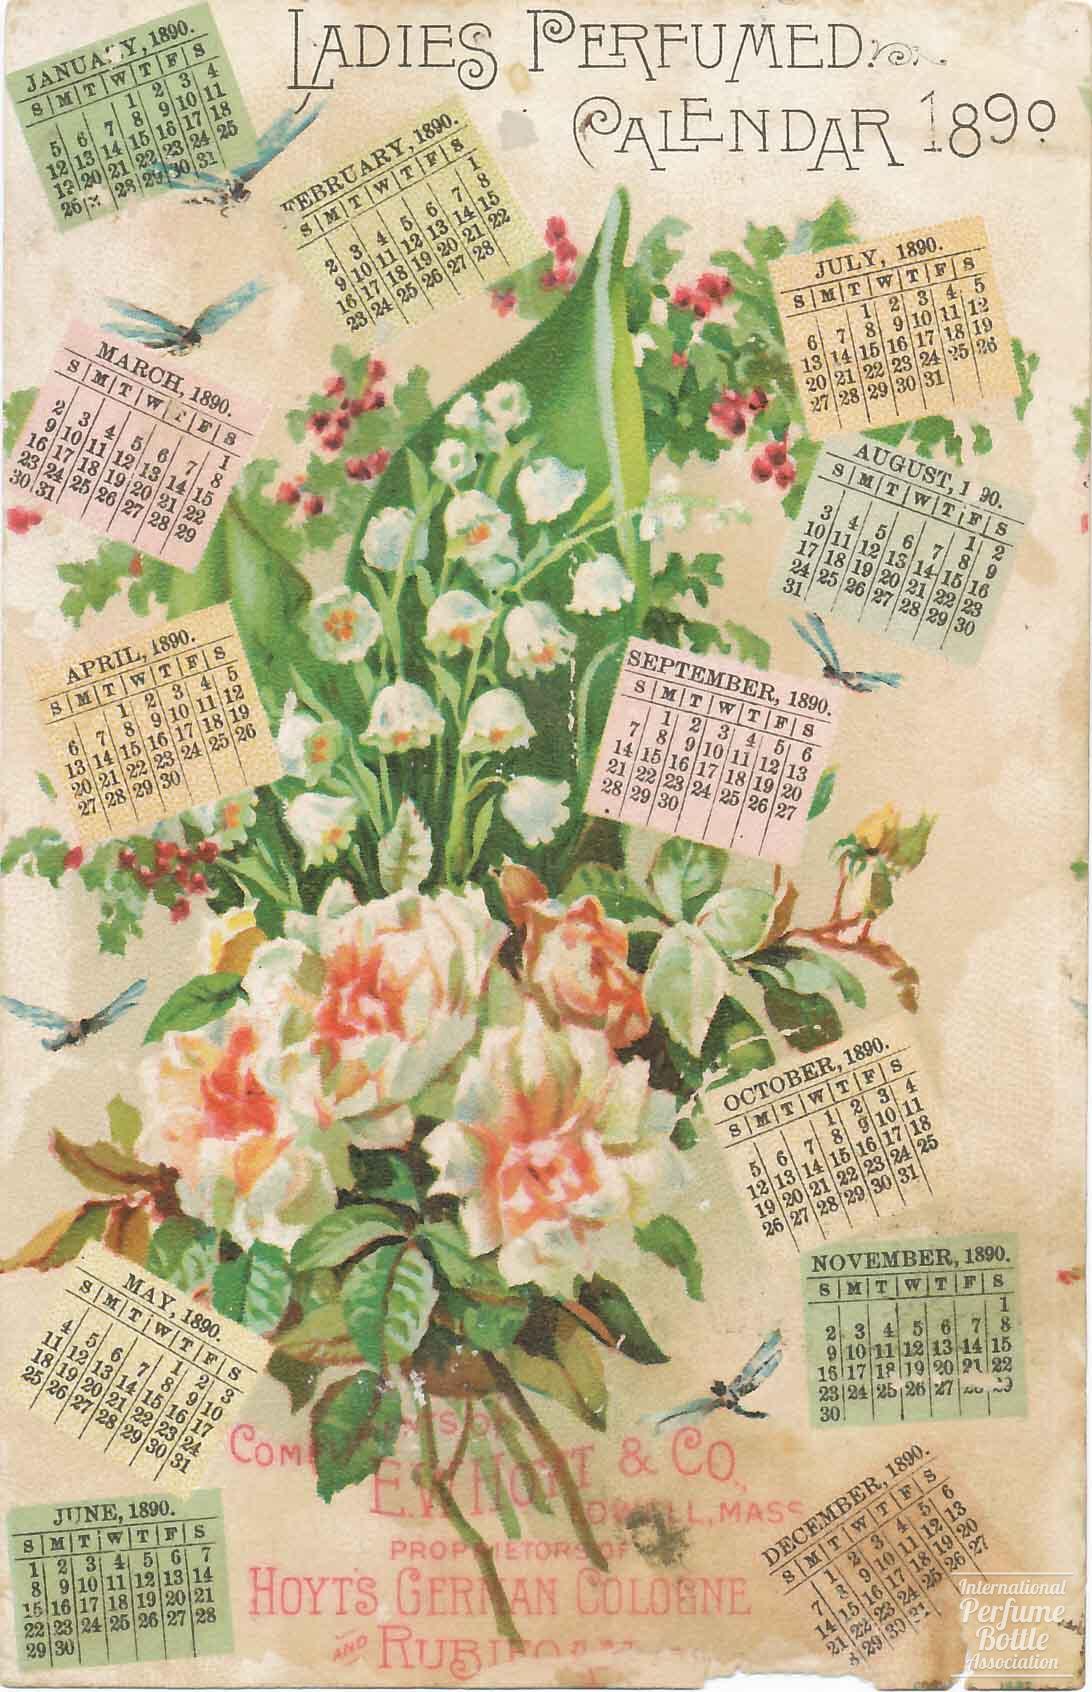 "Hoyt's German Cologne" Scent Card by E. W. Hoyt With 1890 Calendar